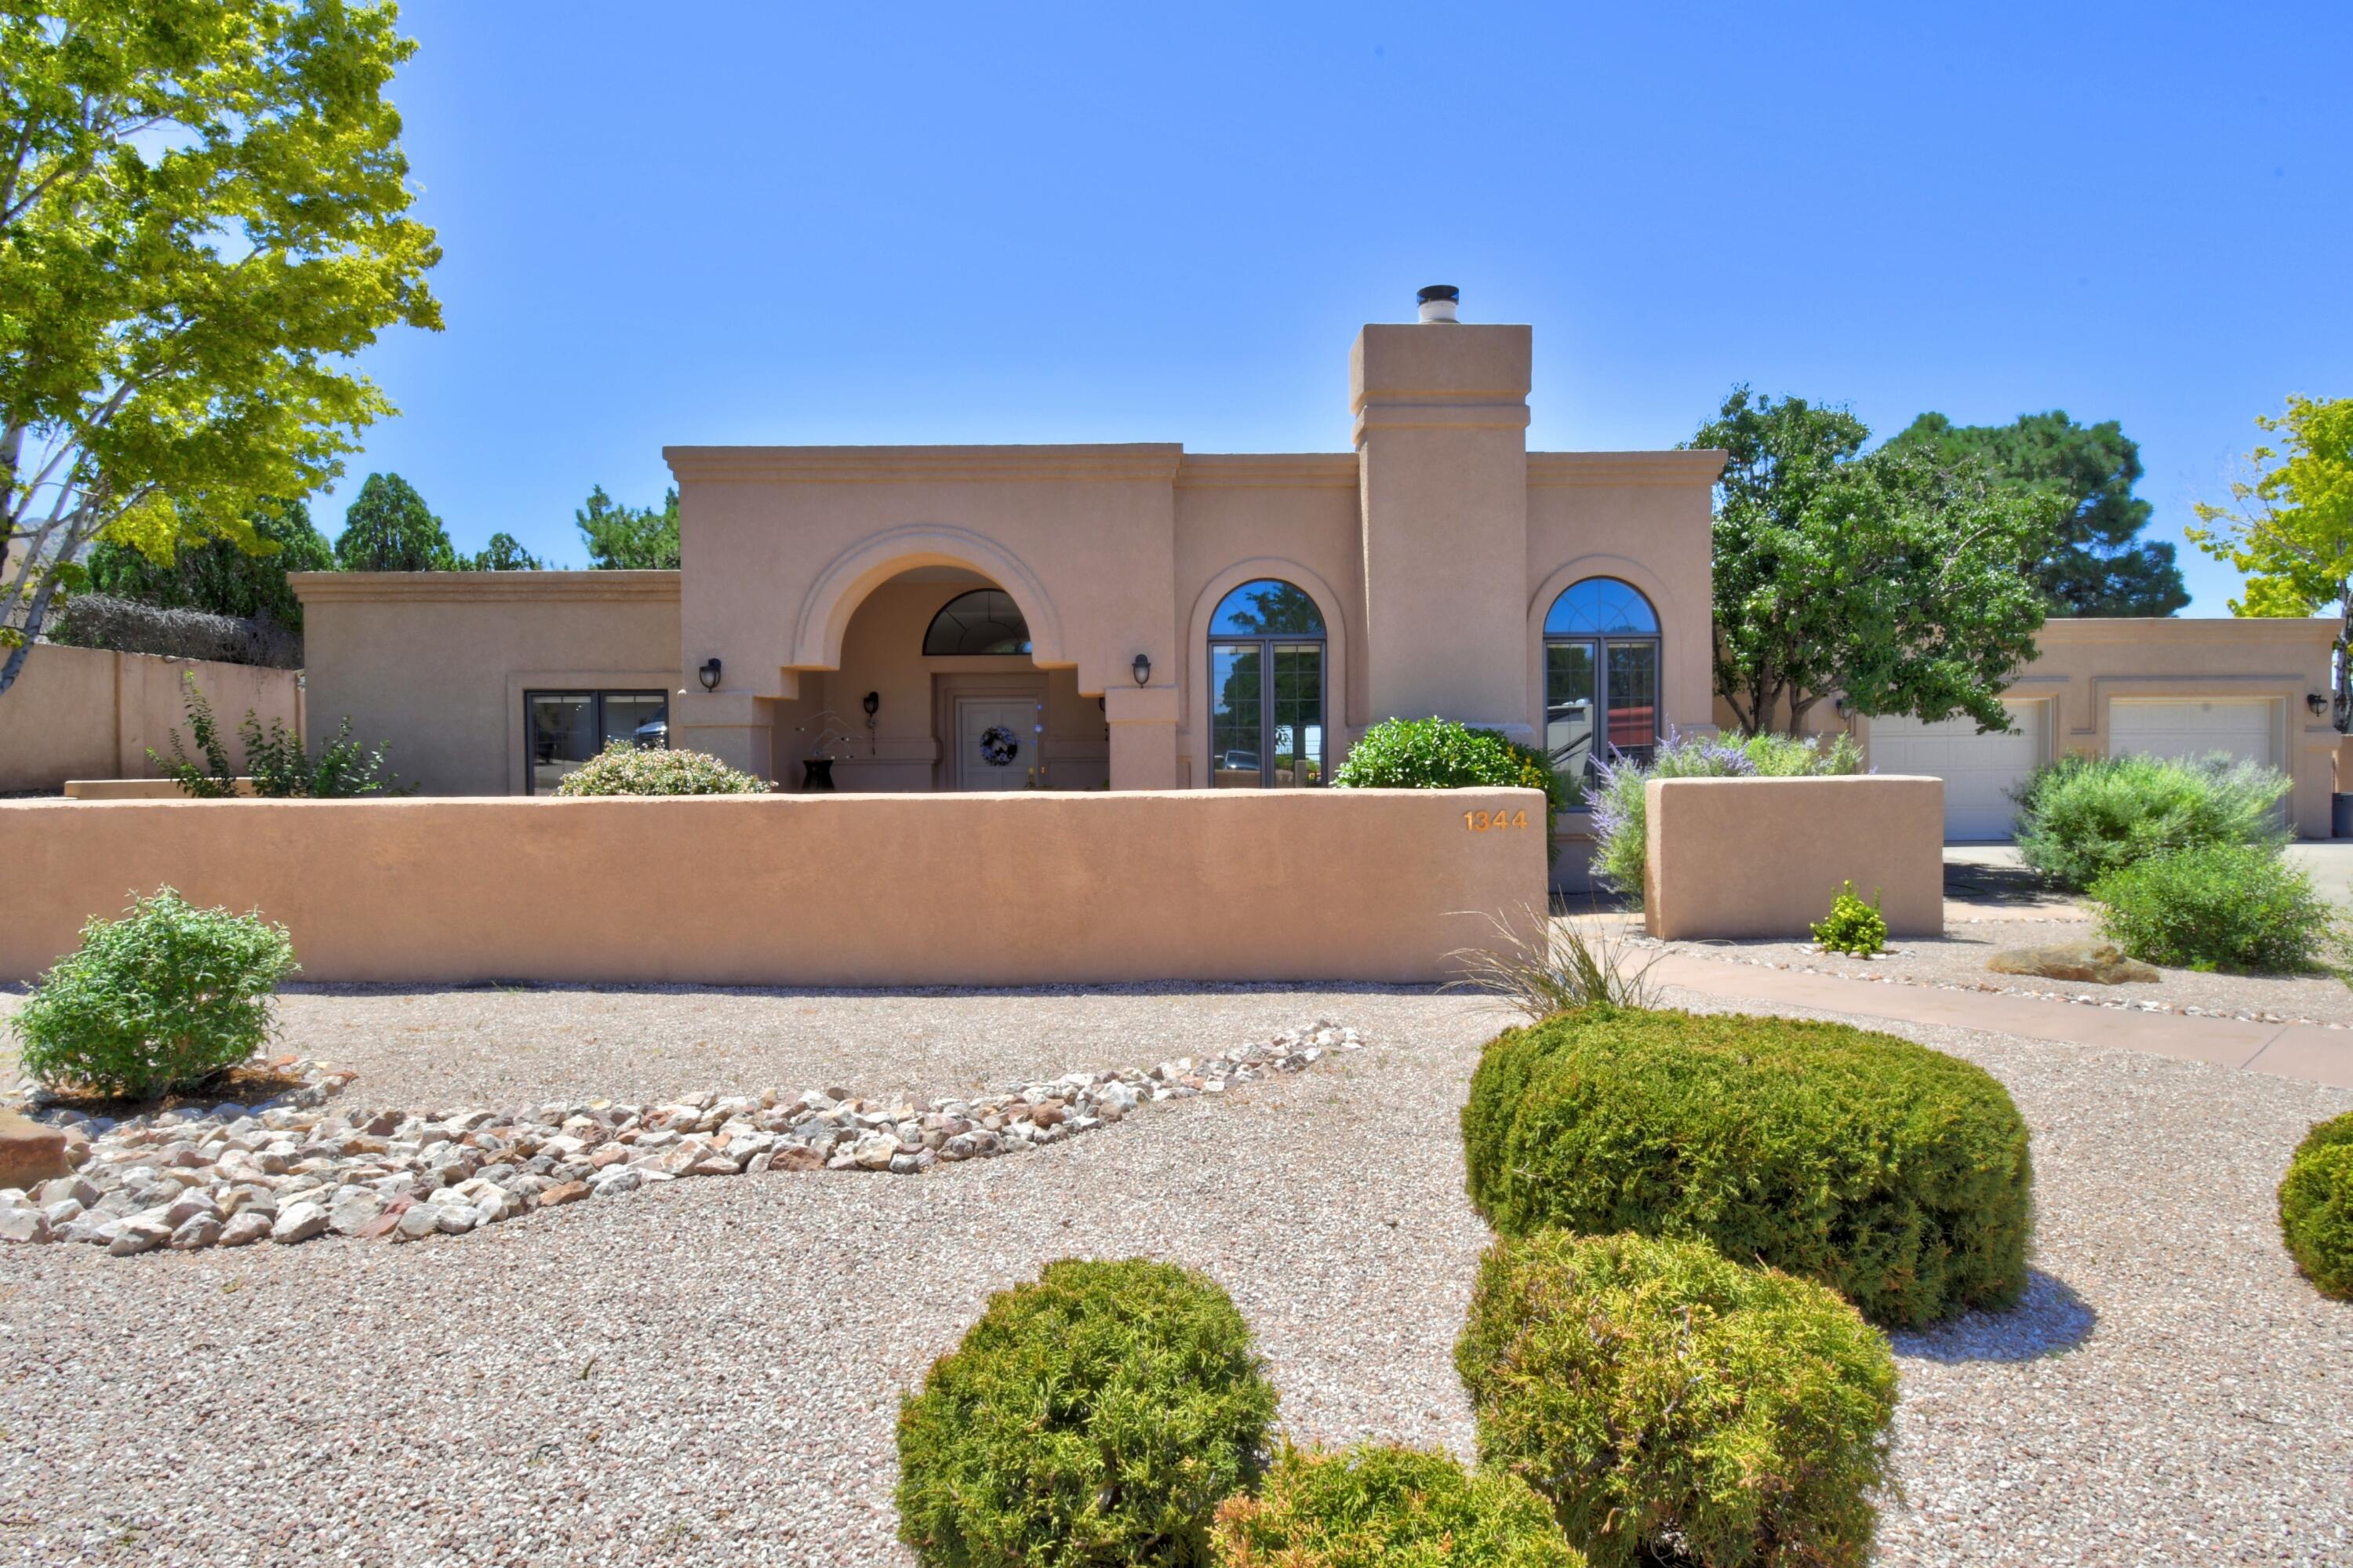 Stunning Four Hills Home, close to Canyon Club Golf Course. Gorgeous NM skyline backing up to open space, this 3 bedroom, 4 bath, single-story custom home offers panoramic views. Newly remodeled kitchen (2021) with black stainless appliances, instant hot water, pot filler, custom maple cabinets, Brazilian natural stone counter tops and large pantry. Prep island with sink and garbage disposal. Extra storage throughout, radiant heat, HVAC system, high ceilings and plenty of skylights. Wet bar with wine fridge and marble counter top. New TPO roofing (2021). Spacious yard features a 16x32 Gunite pool, 2 storage sheds, greenhouse. Extra large 1200 sq ft garage offers plenty of room for 4+ vehicles. Loads of upgrades and added features, Perfect home to entertain.  You can't miss this one!